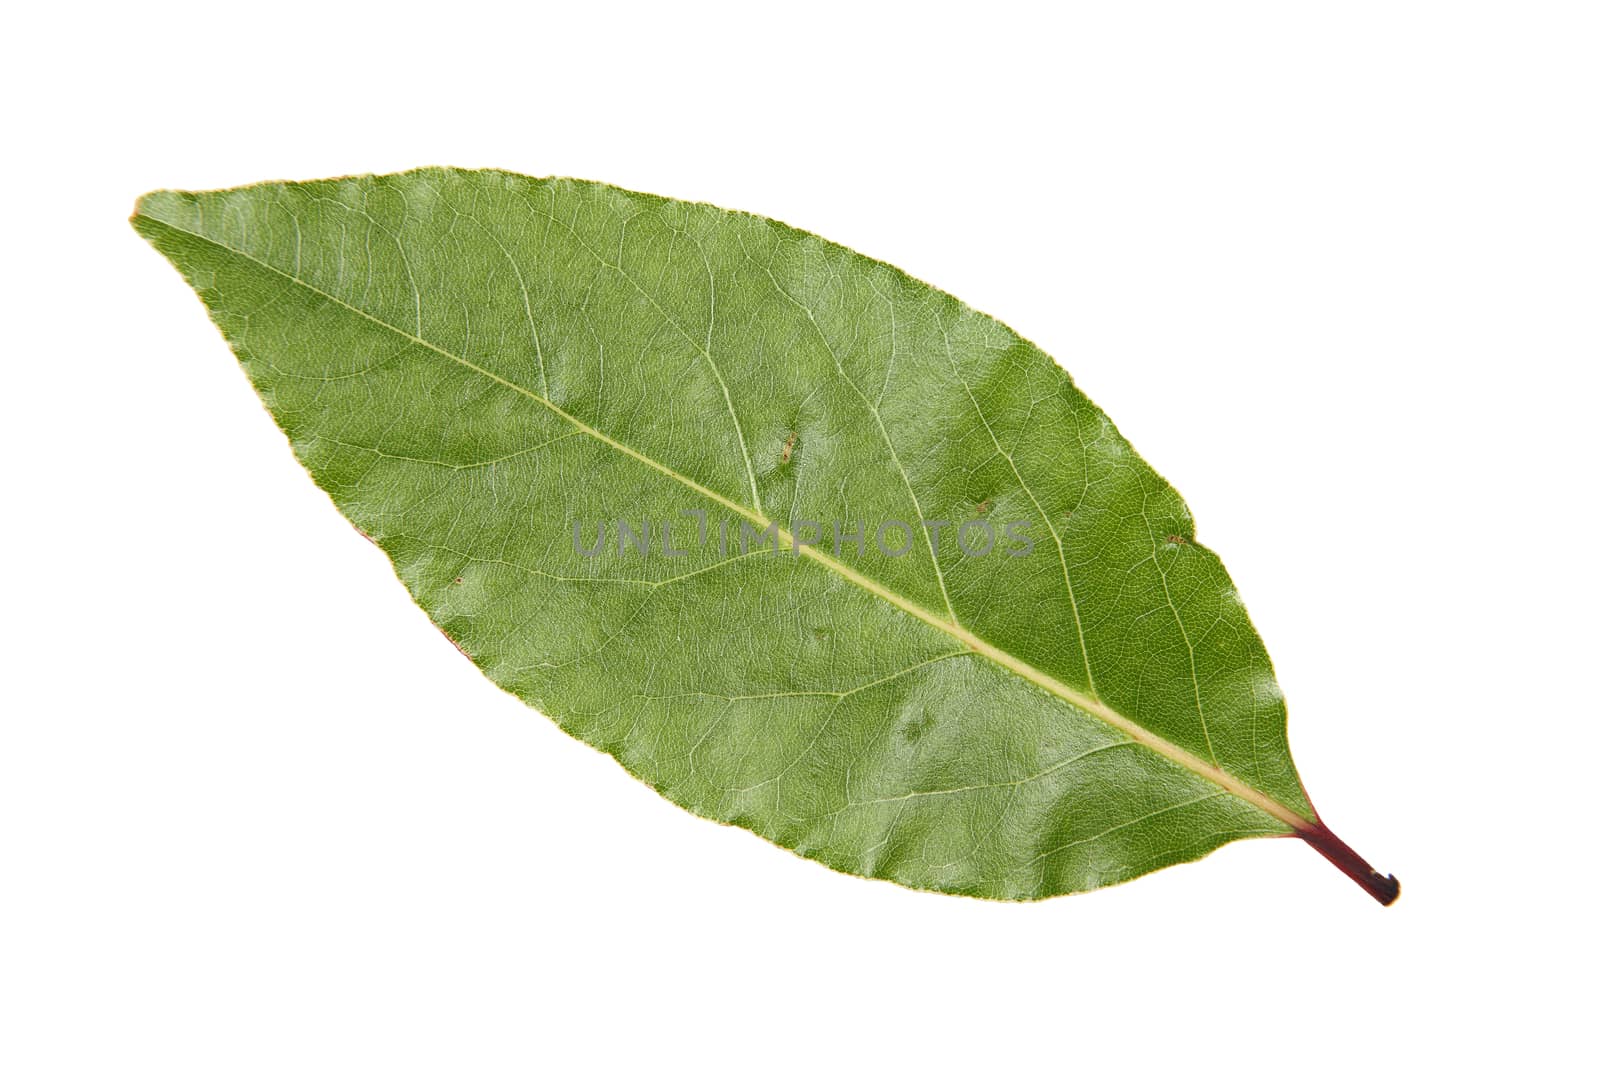 Bay leaf cut out and isolated  by ant